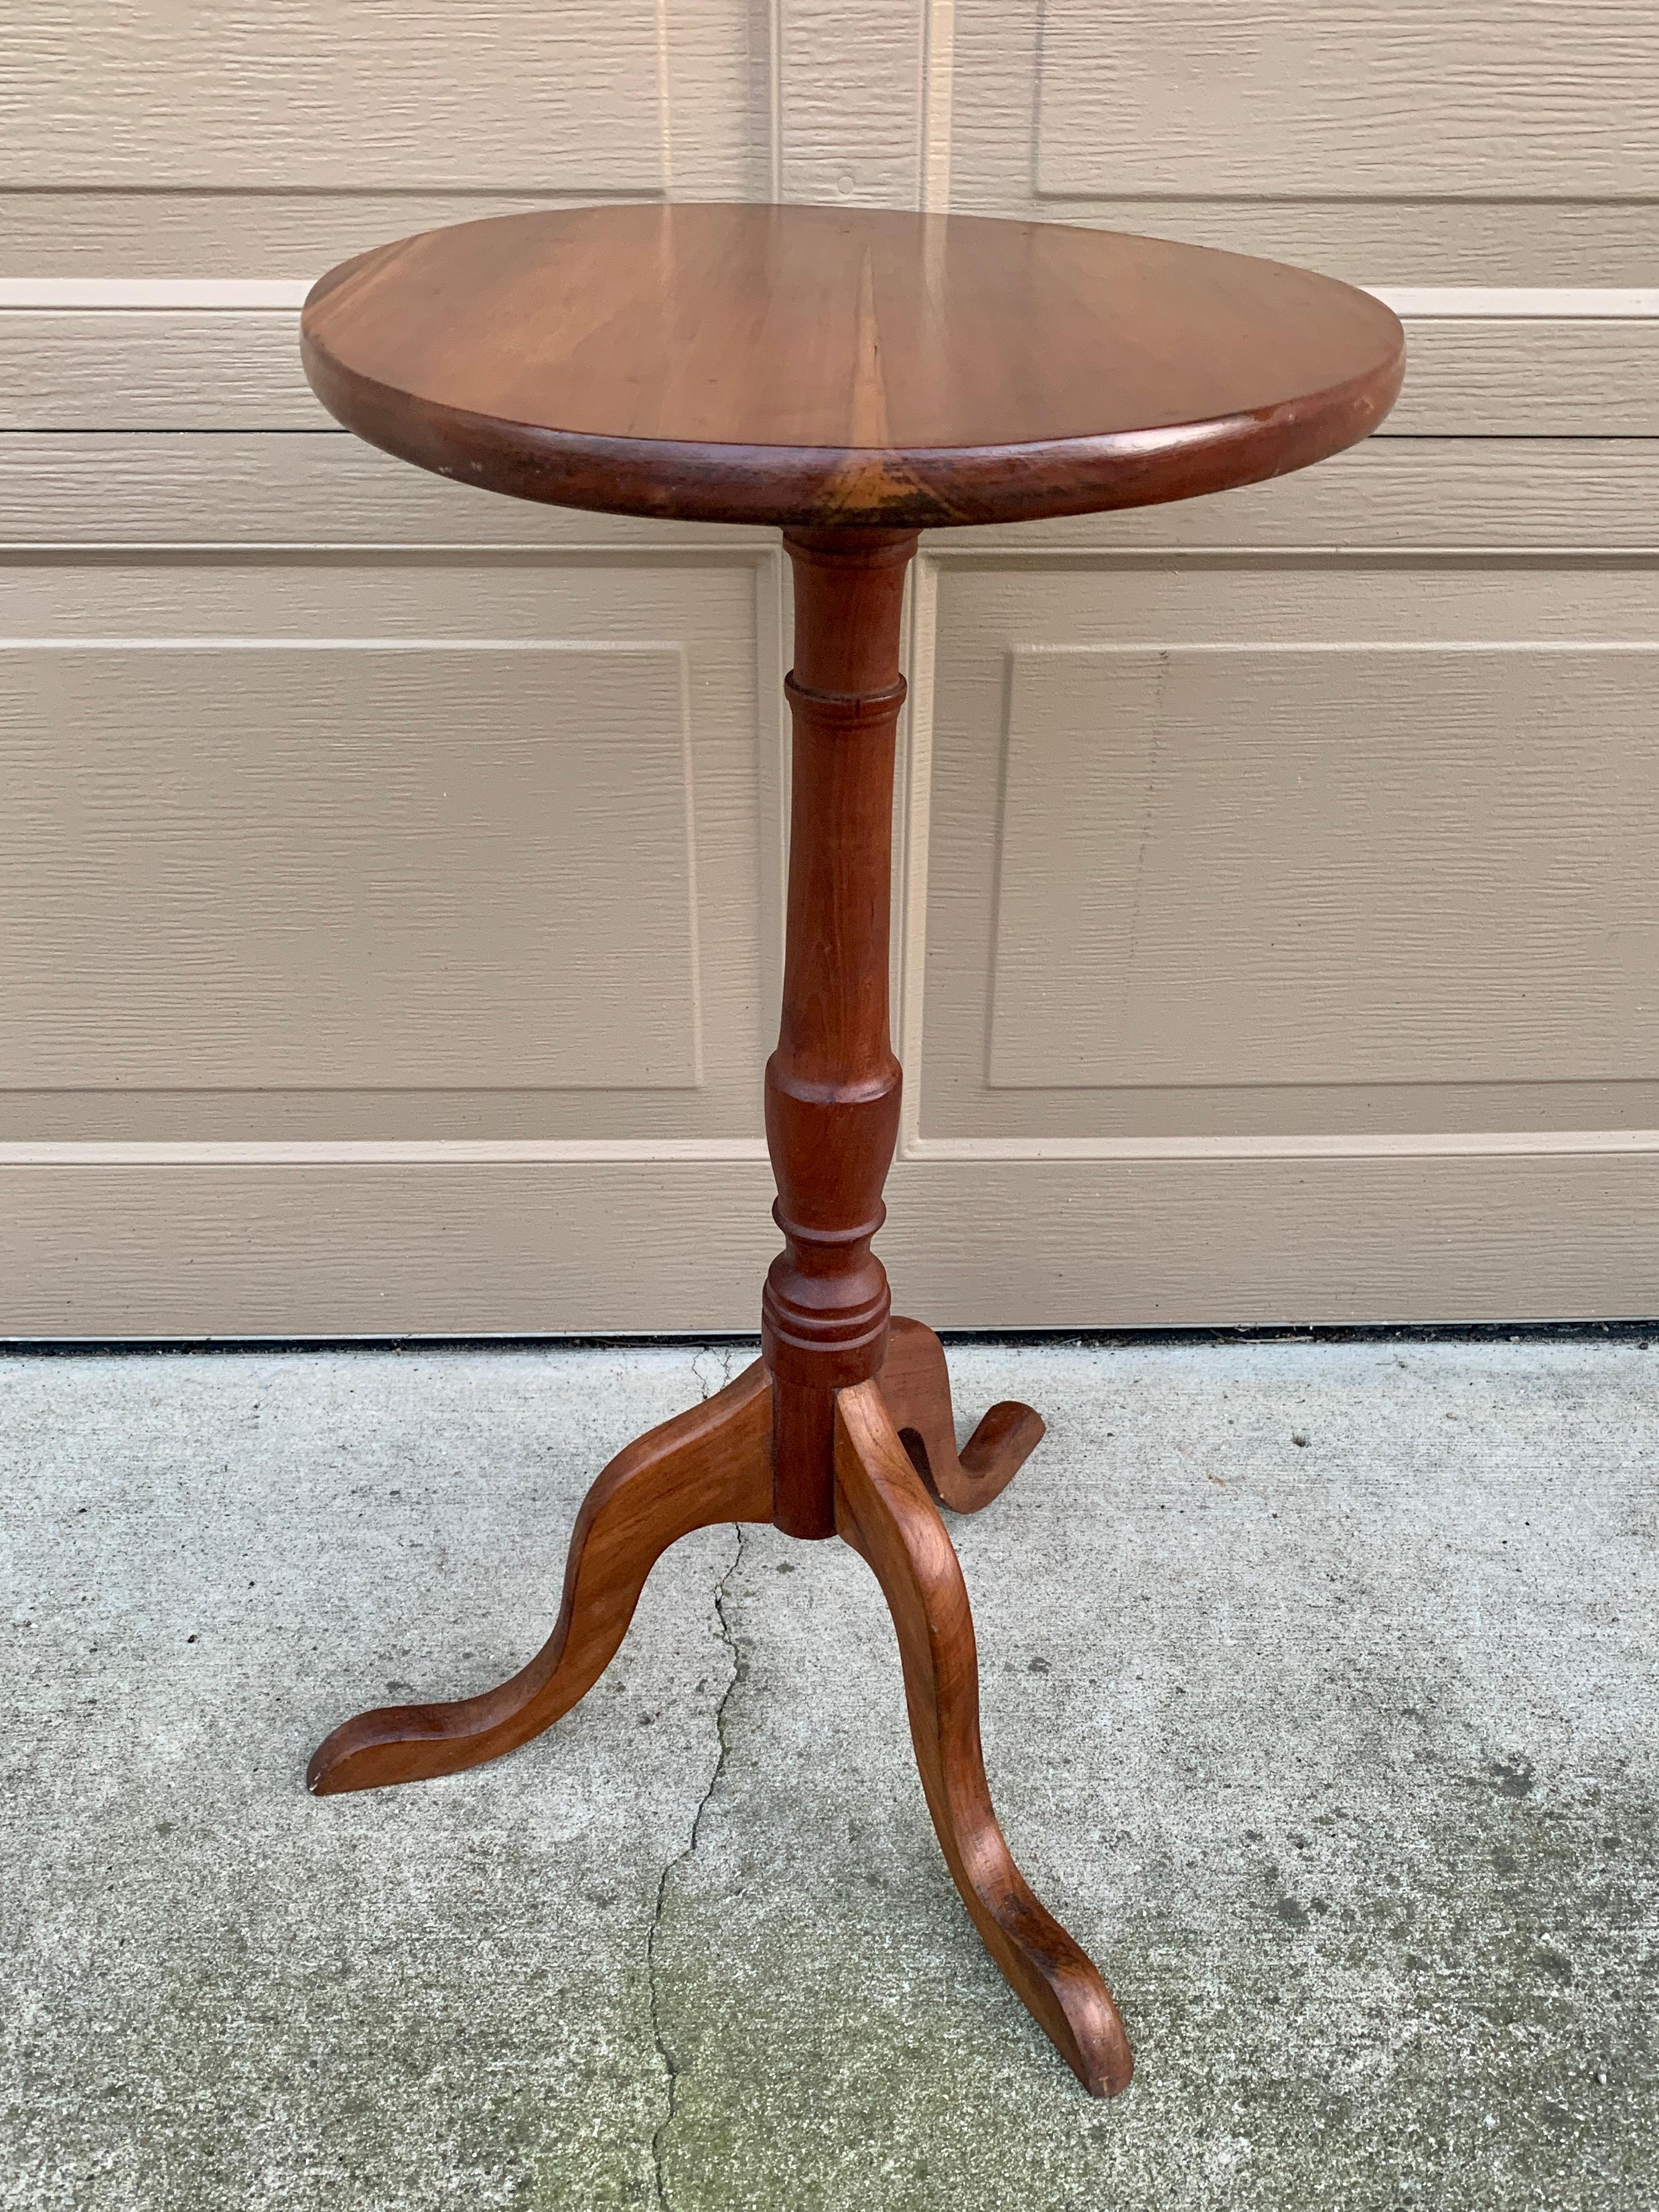 Antique American Colonial Cherry Candle Stand or Side Table, Mid 19th Century 7